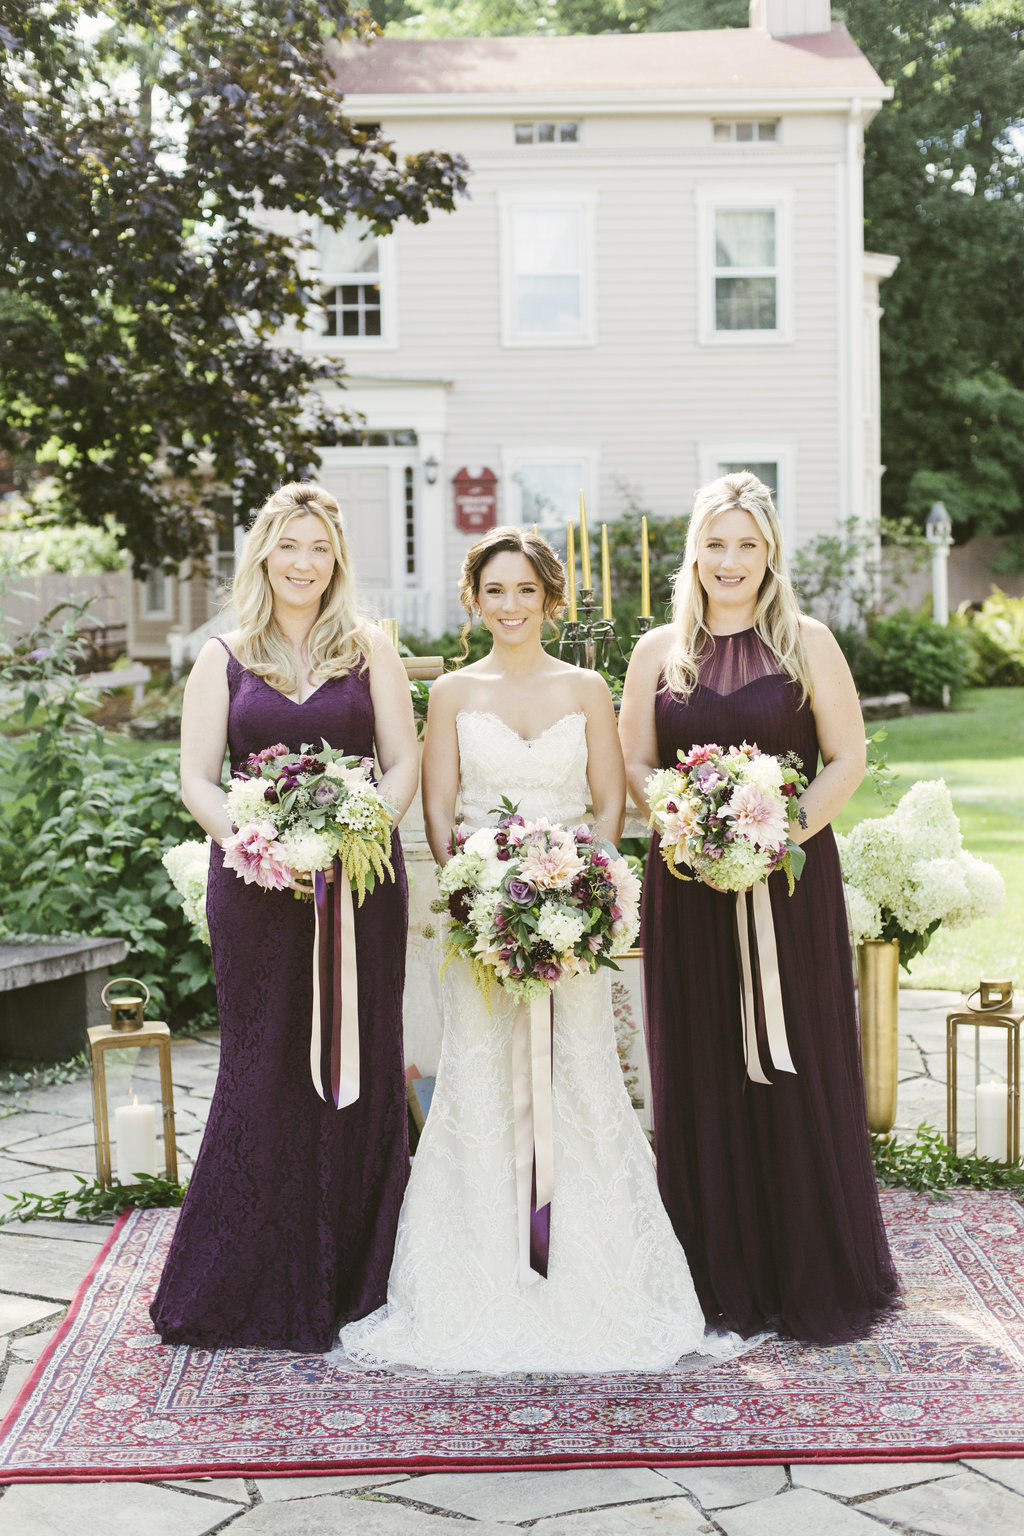 Monica-Relyea-Events-Alicia-King-Photography-Delamater-Inn-Beekman-Arms-Wedding-Rhinebeck-New-York-Hudson-Valley85